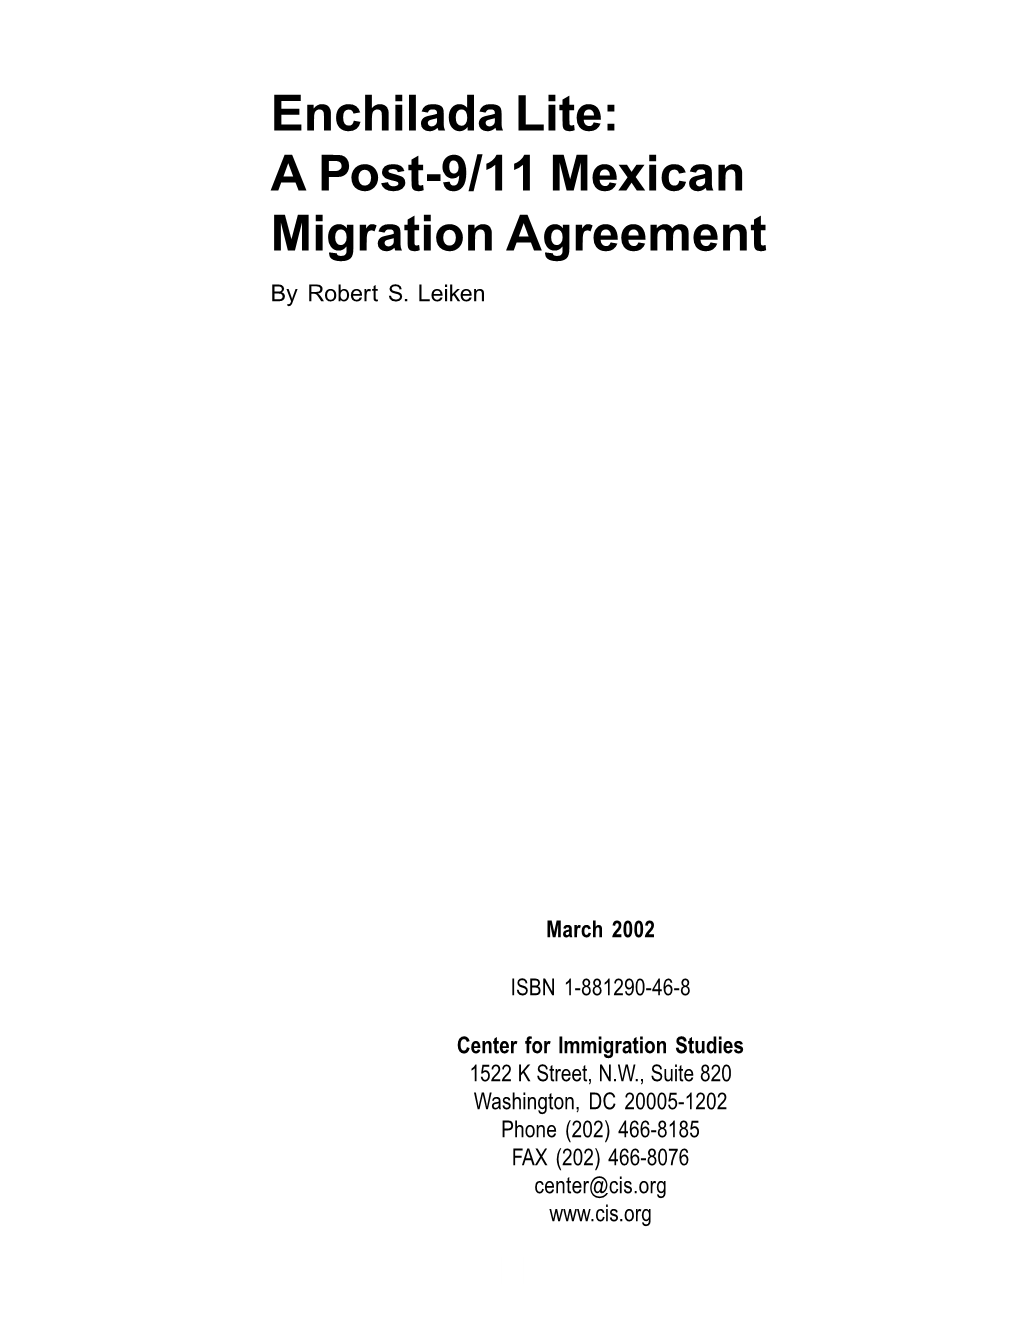 Enchilada Lite: a Post-9/11 Mexican Migration Agreement by Robert S